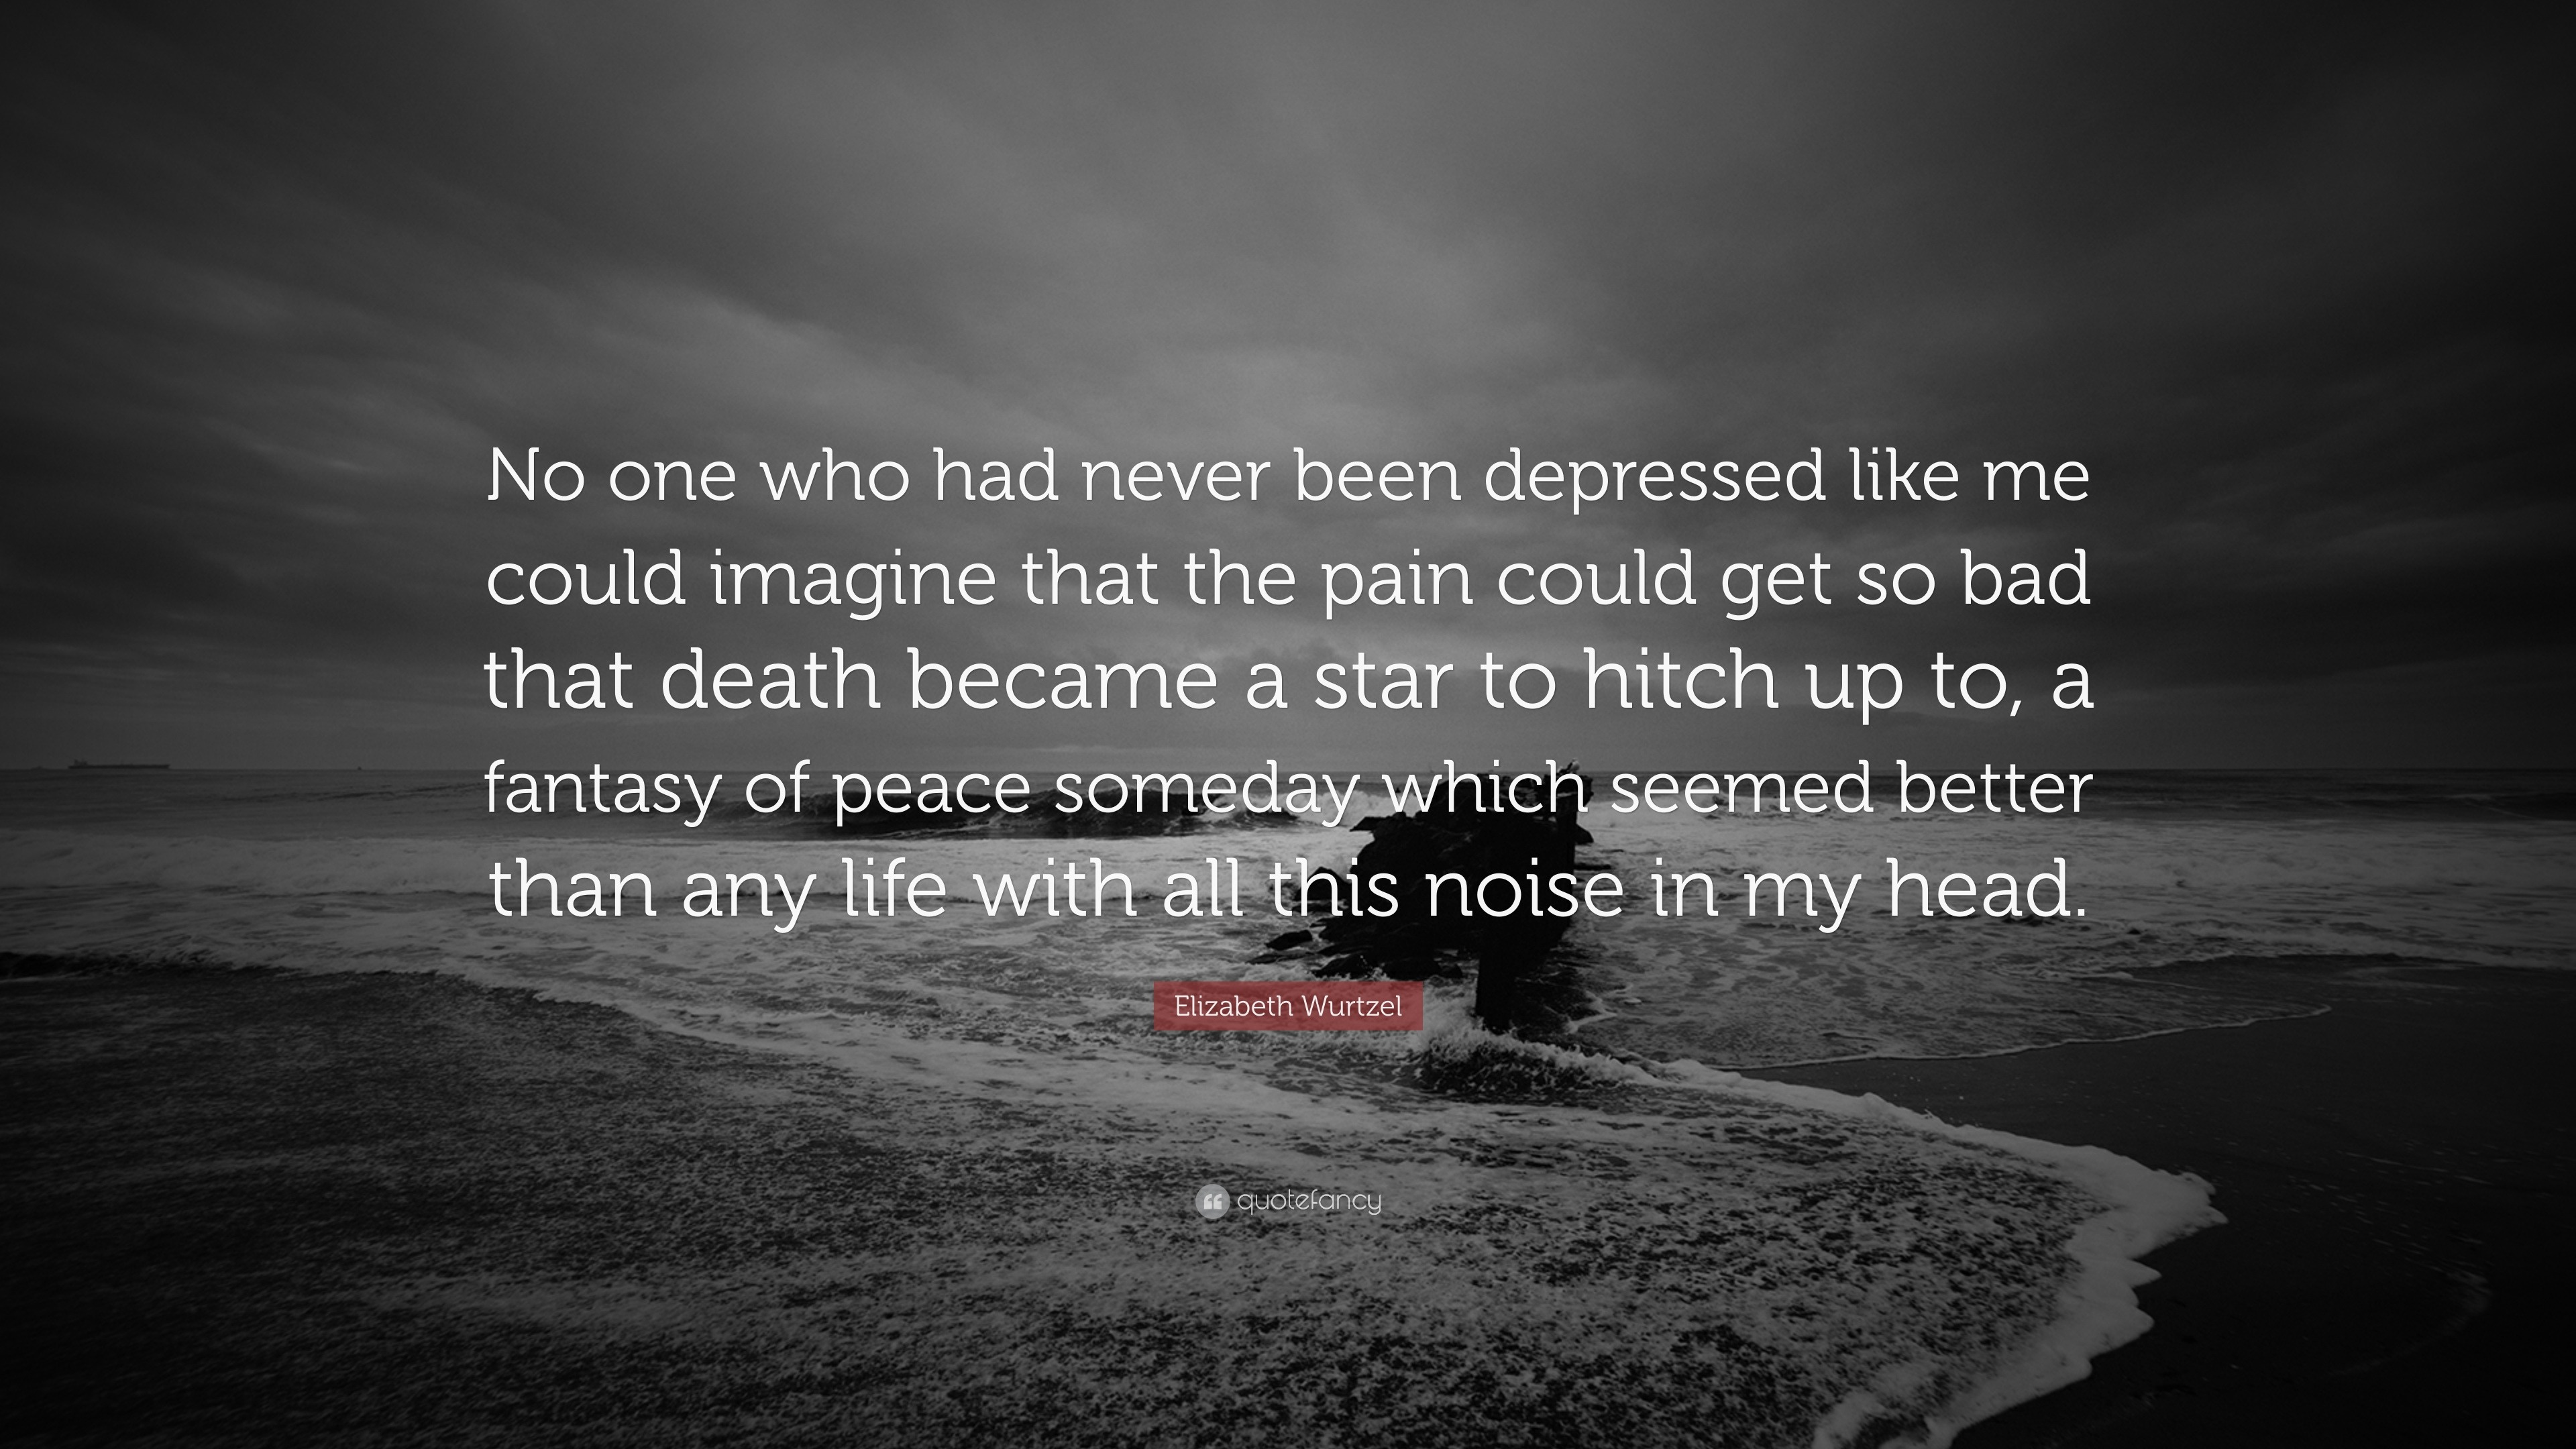 Elizabeth Wurtzel Quote: “No one who had never been depressed like me ...